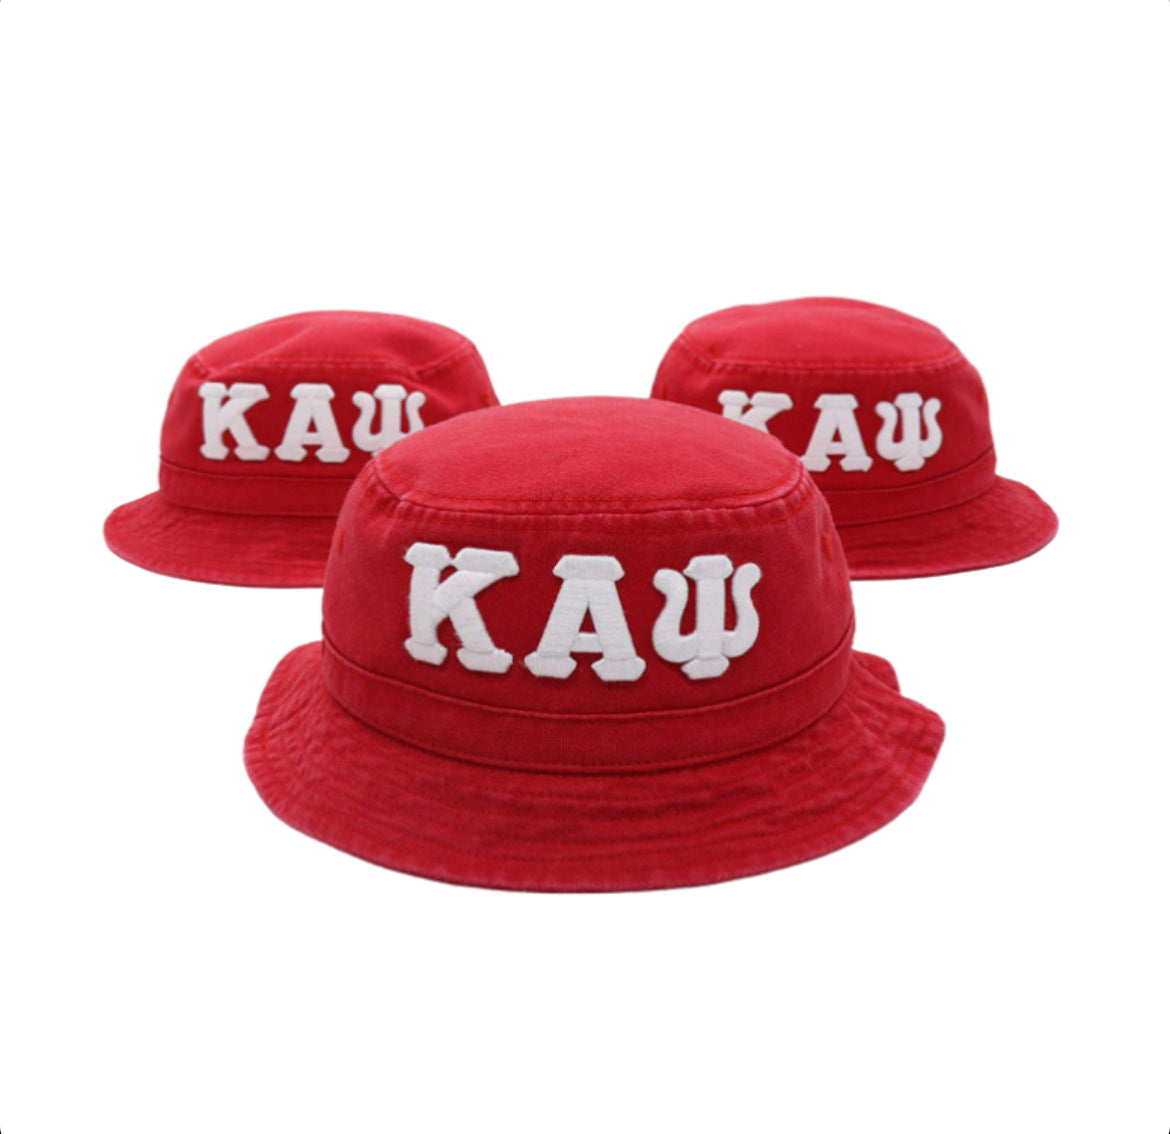 Show off your love for Kappa Alpha Psi with this stylish bucket hat. Perfect for any occasion, this hat is a must-have for any Kappa man of the fraternity. The iconic design features the Kappa Alpha Psi logo embroidered on the front, making it a statement piece that will turn heads wherever you go.